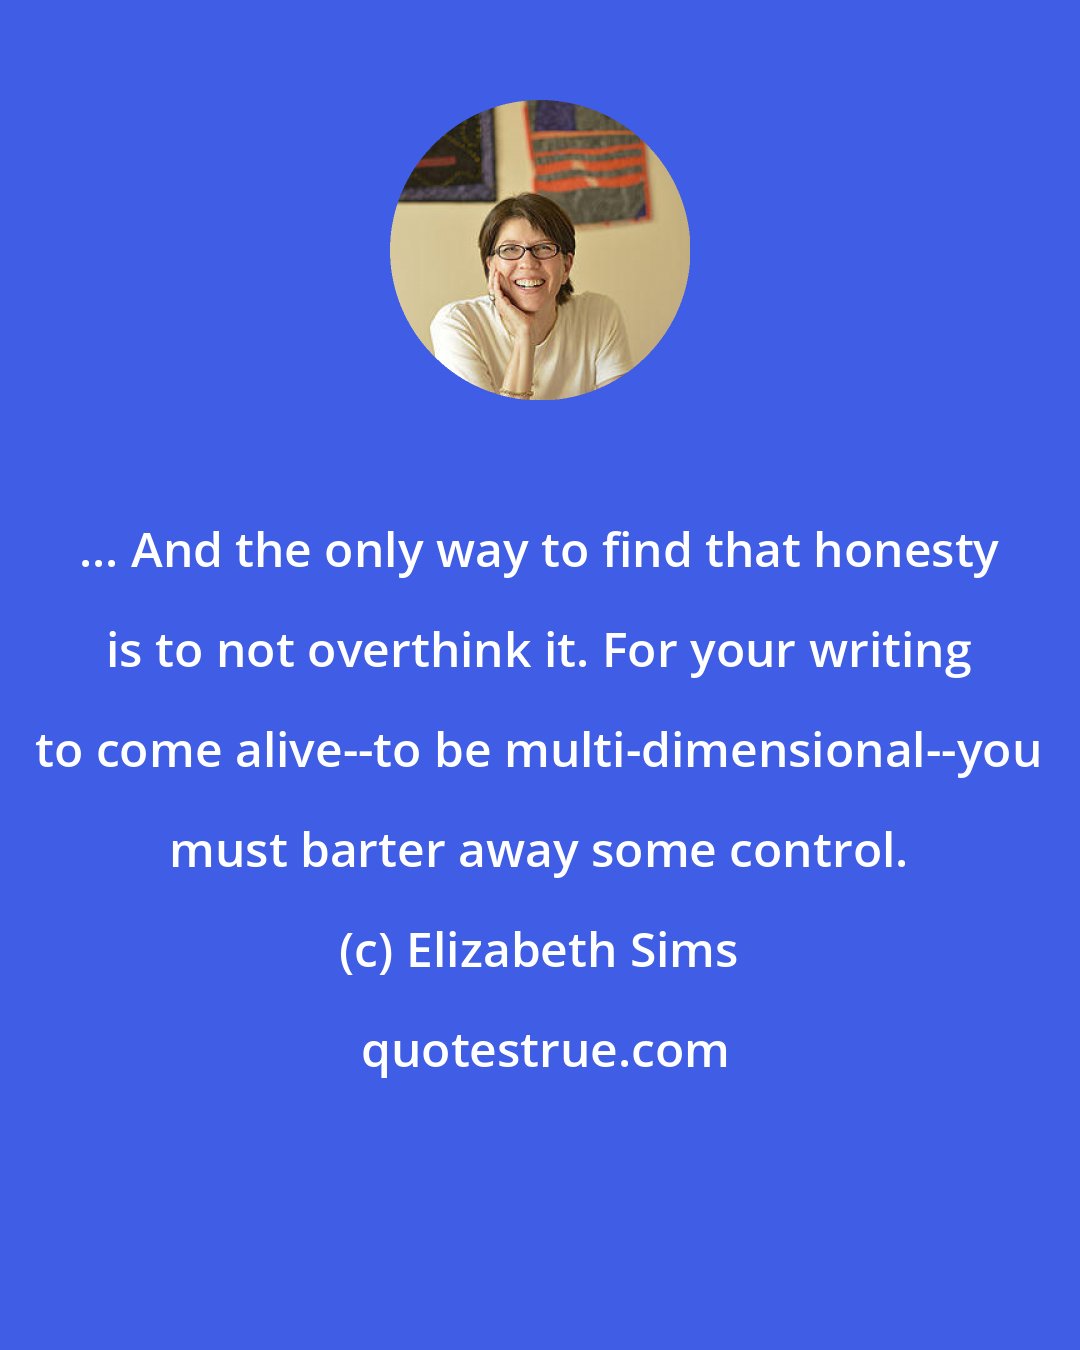 Elizabeth Sims: ... And the only way to find that honesty is to not overthink it. For your writing to come alive--to be multi-dimensional--you must barter away some control.